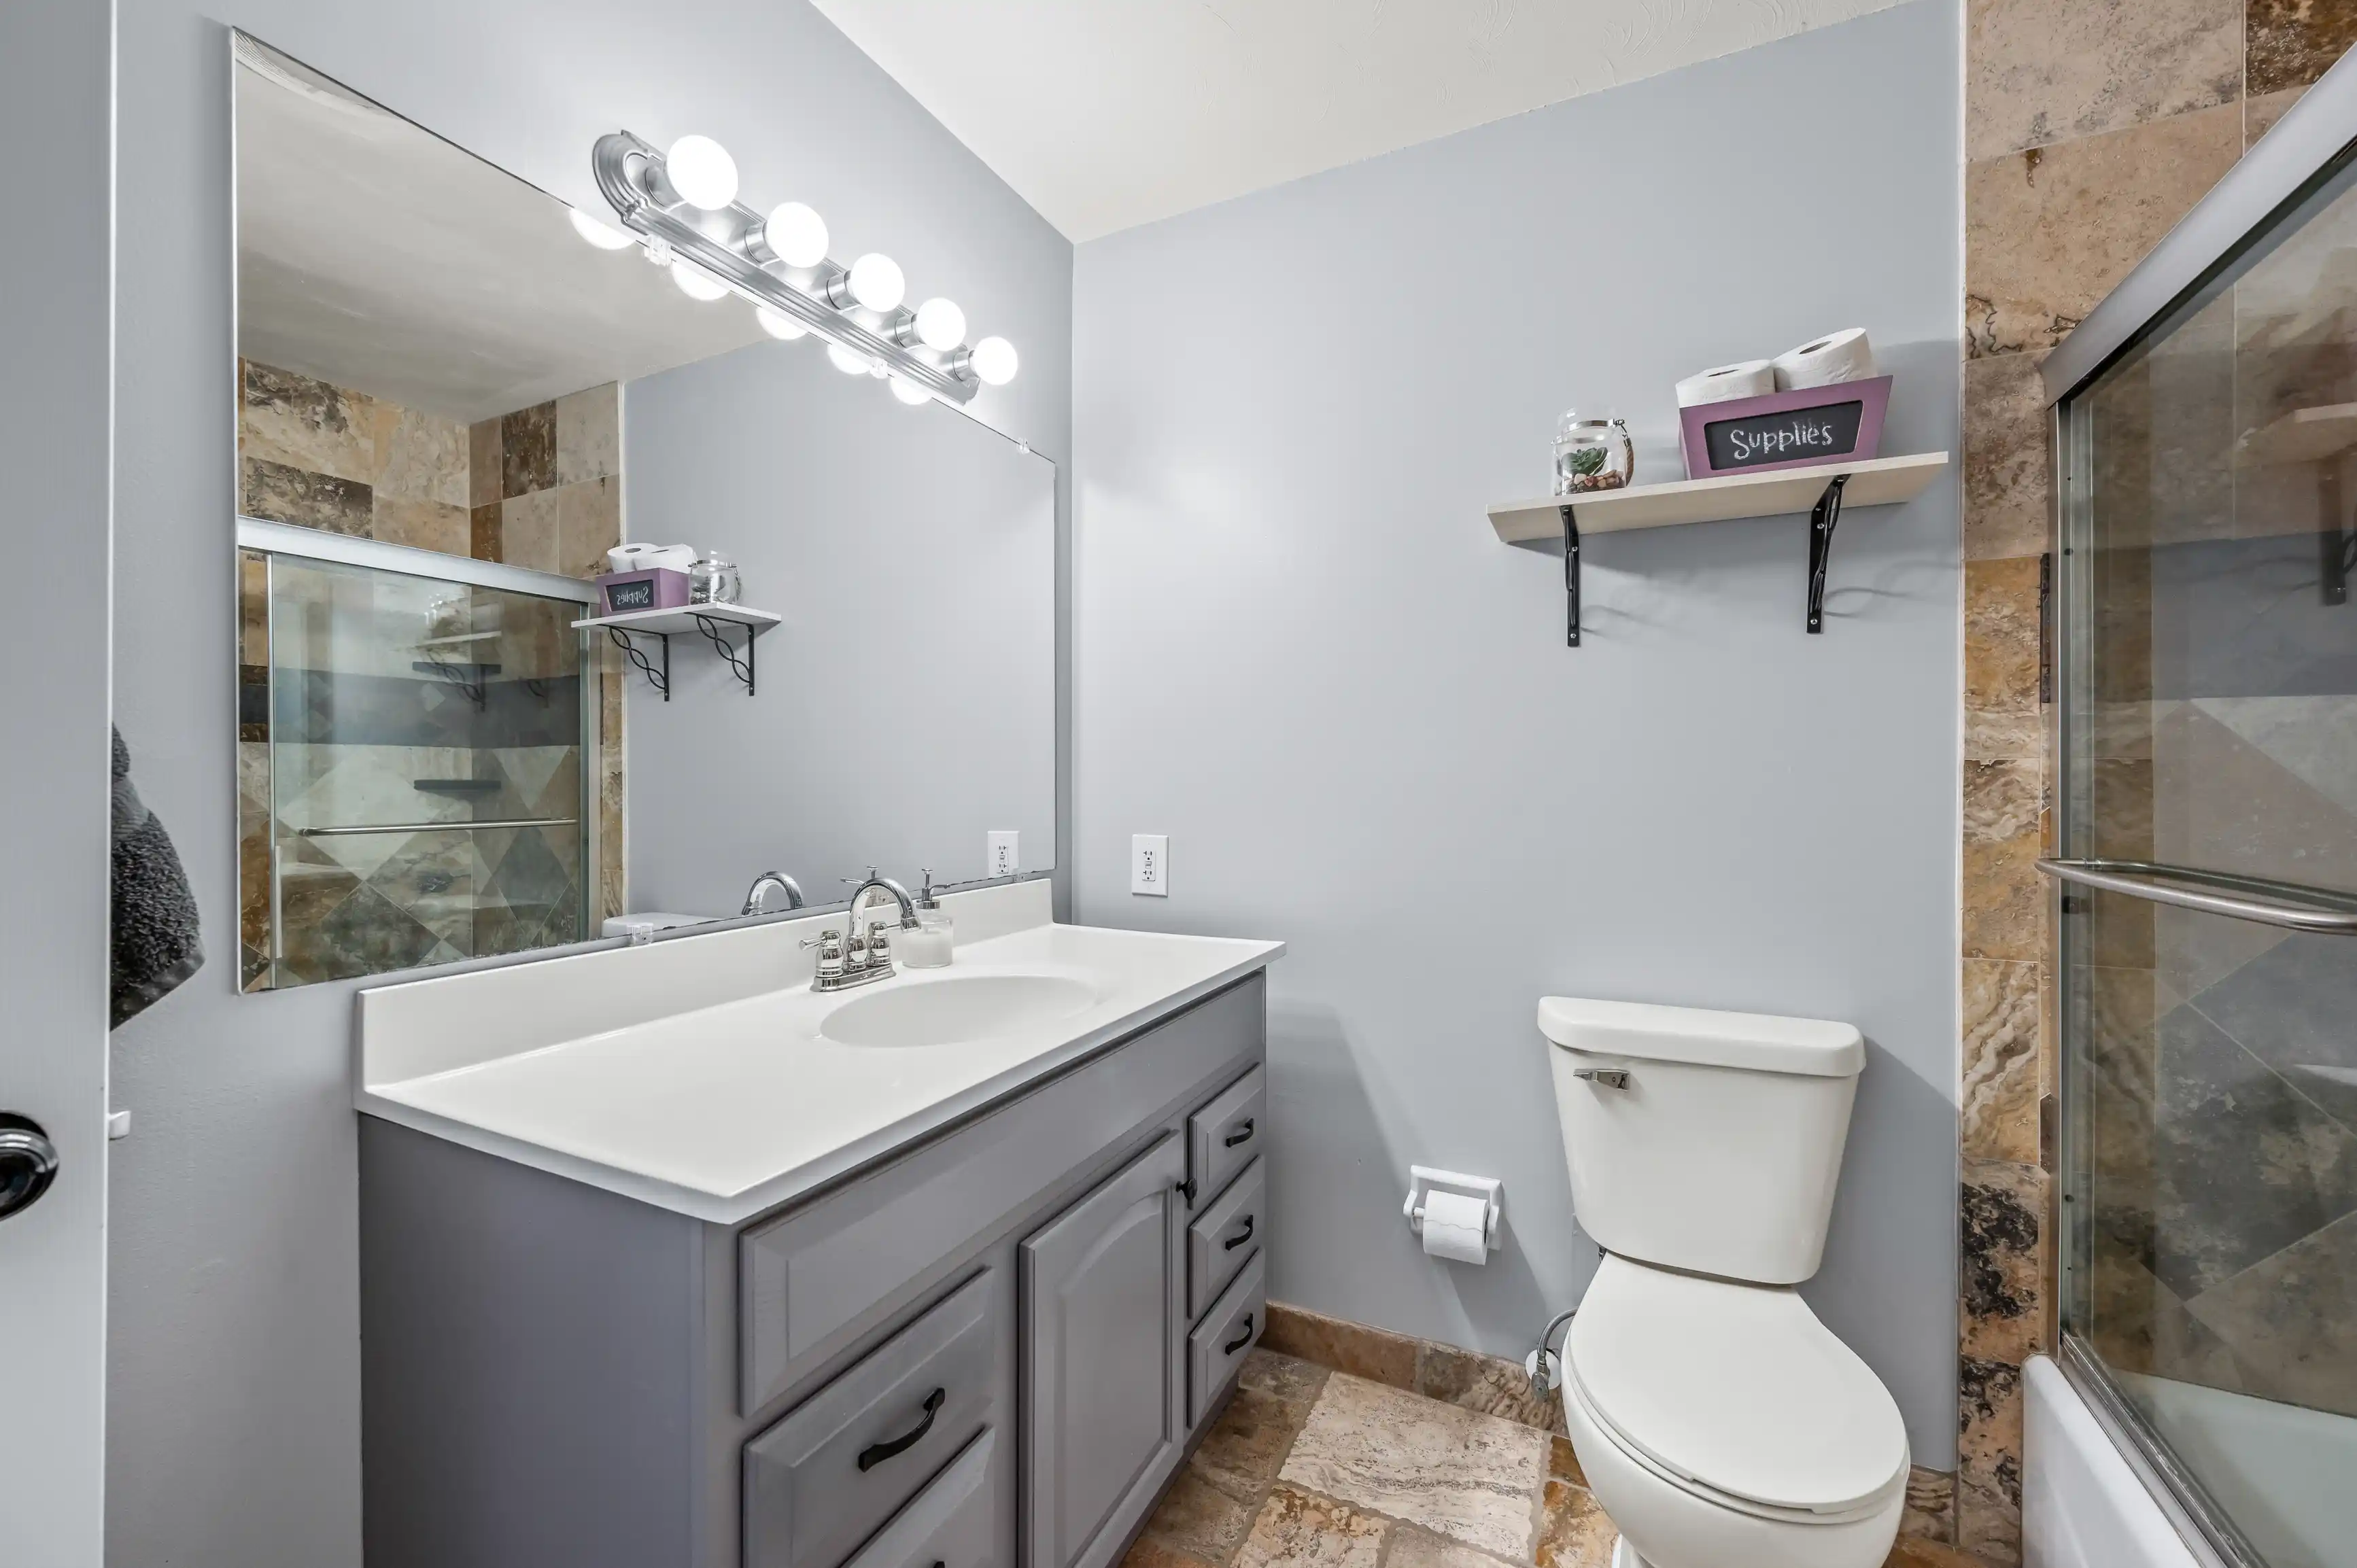 A modern bathroom with a large mirror lit by a row of lights above, a gray vanity with a white countertop and sink, a toilet to the right, and a glass-enclosed shower with stone tile walls. There is also a wooden shelf labeled 'Supplies' on the wall.